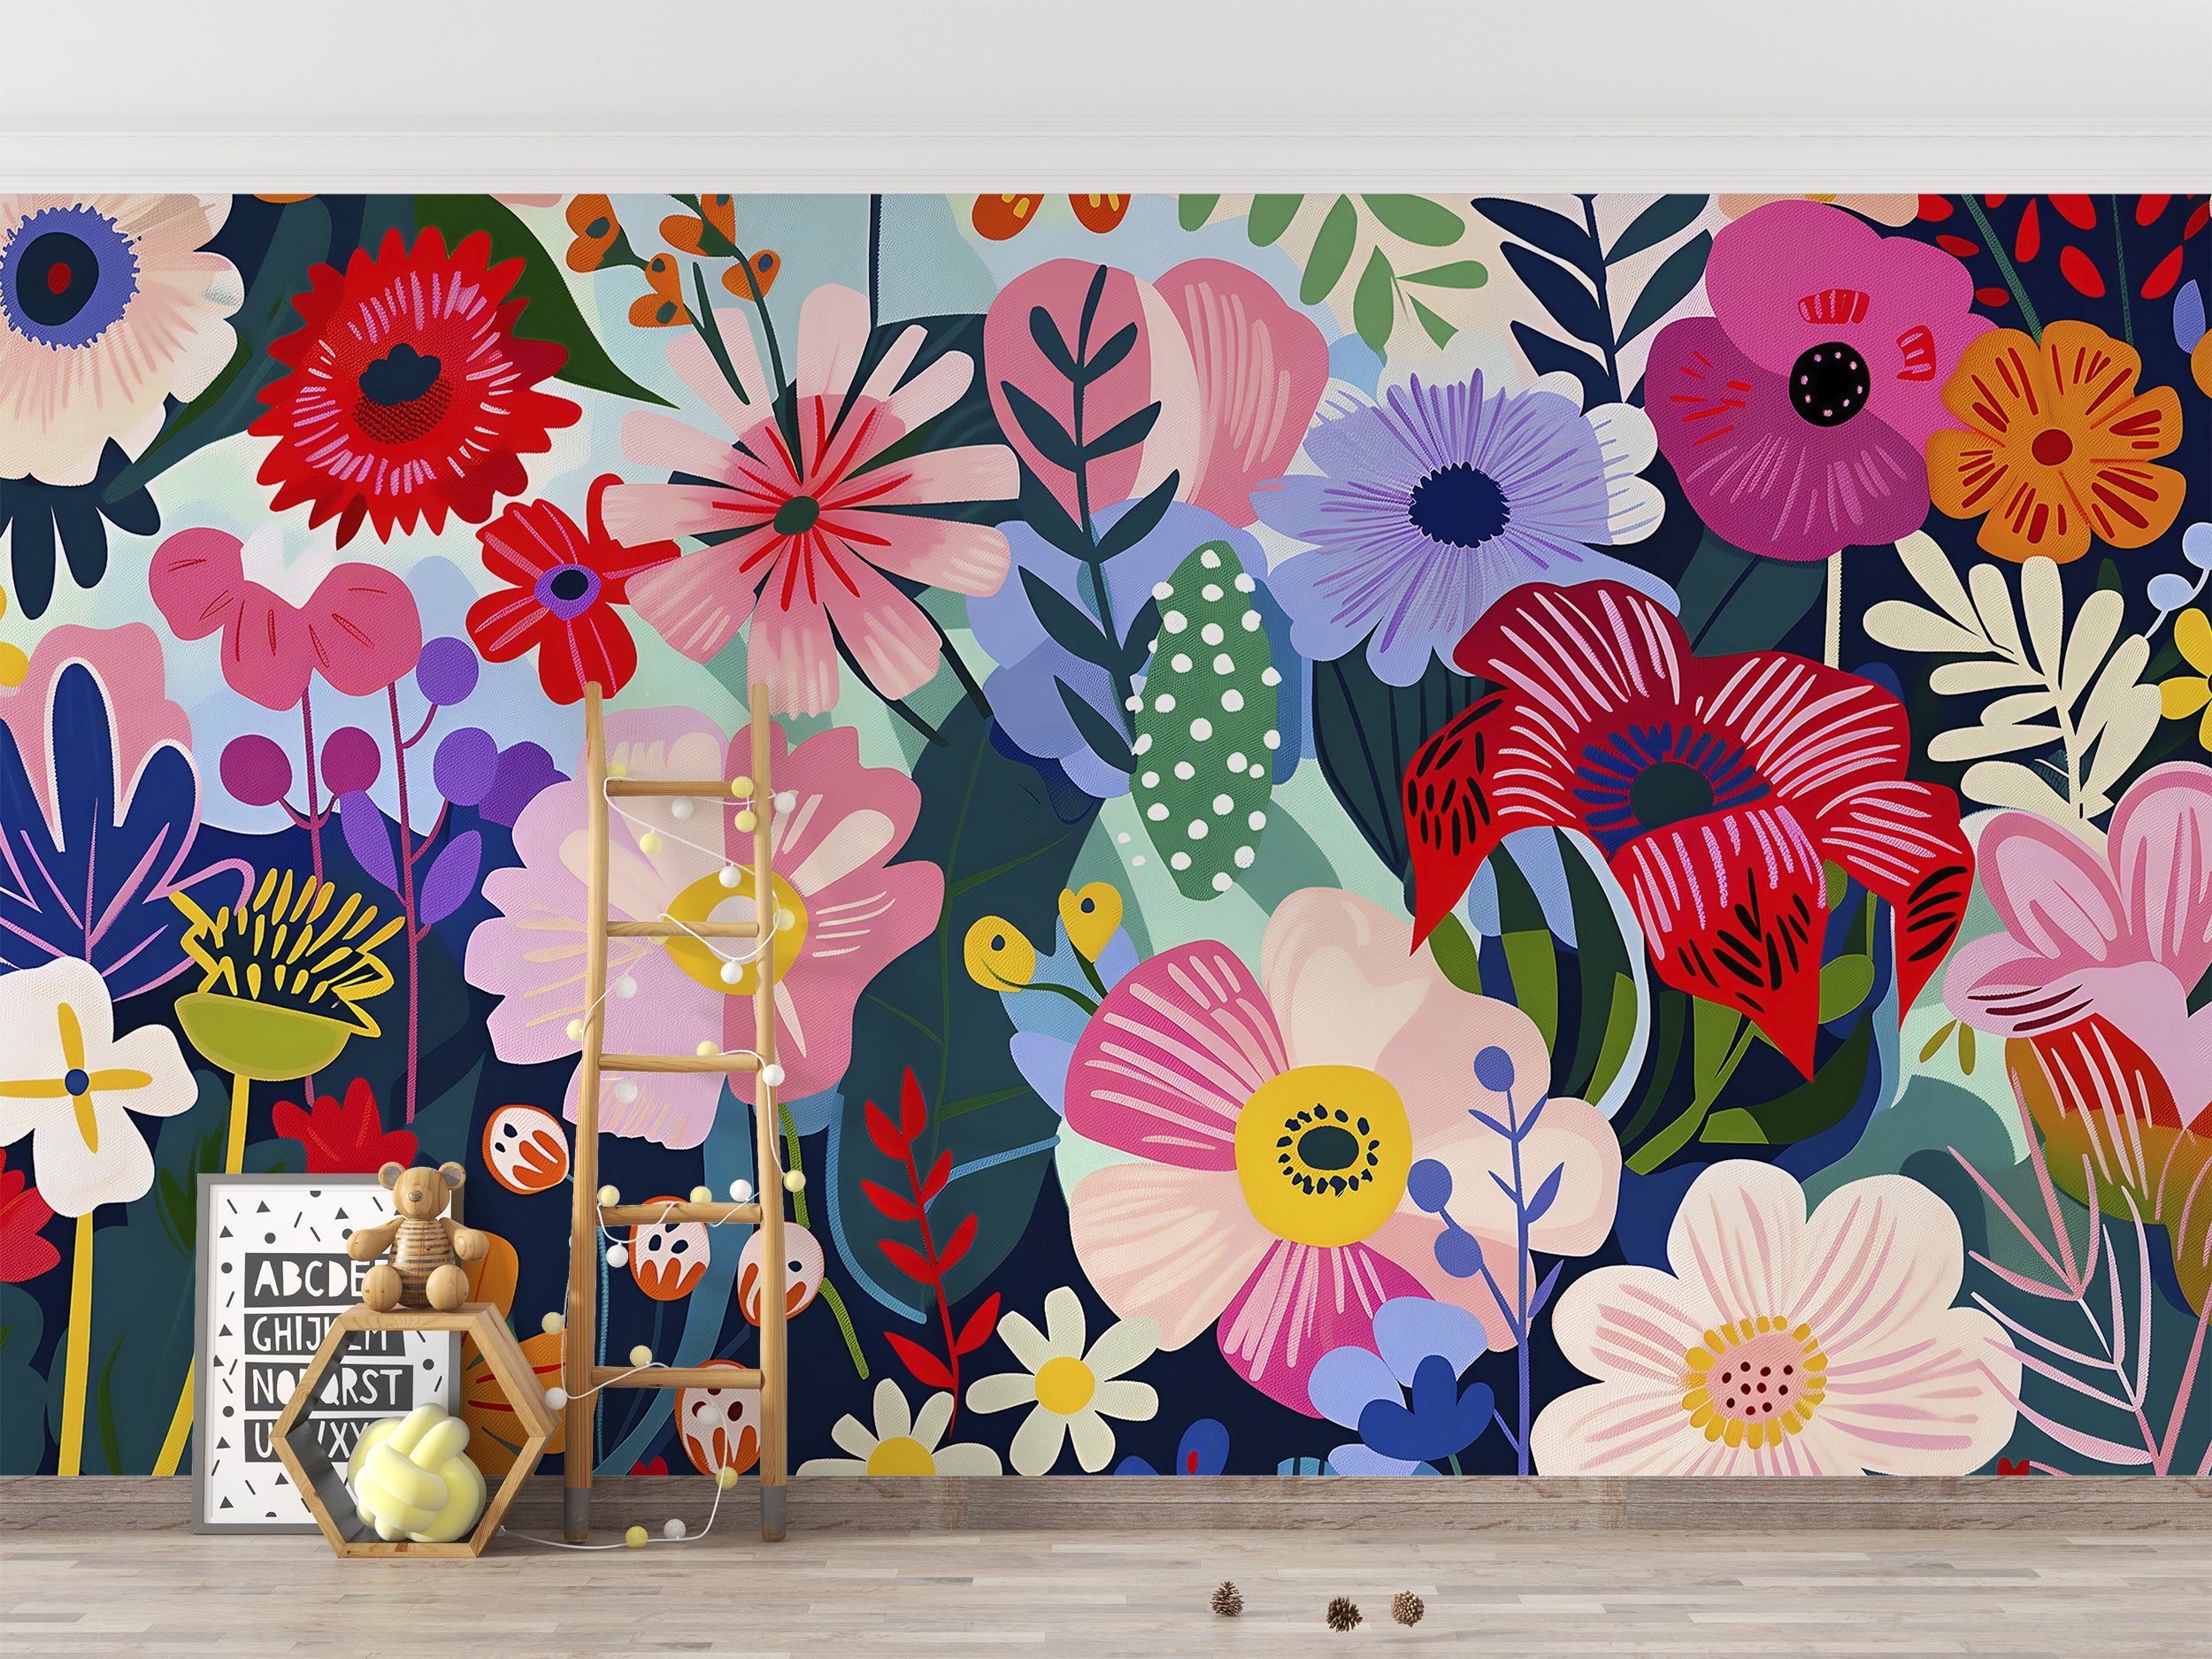 Colorful Abstract Flowers Wallpaper, Peel and Stick Modern Floral Mural, Large Wild Flowers Wall Decor, Removable Meadow Flowers Art